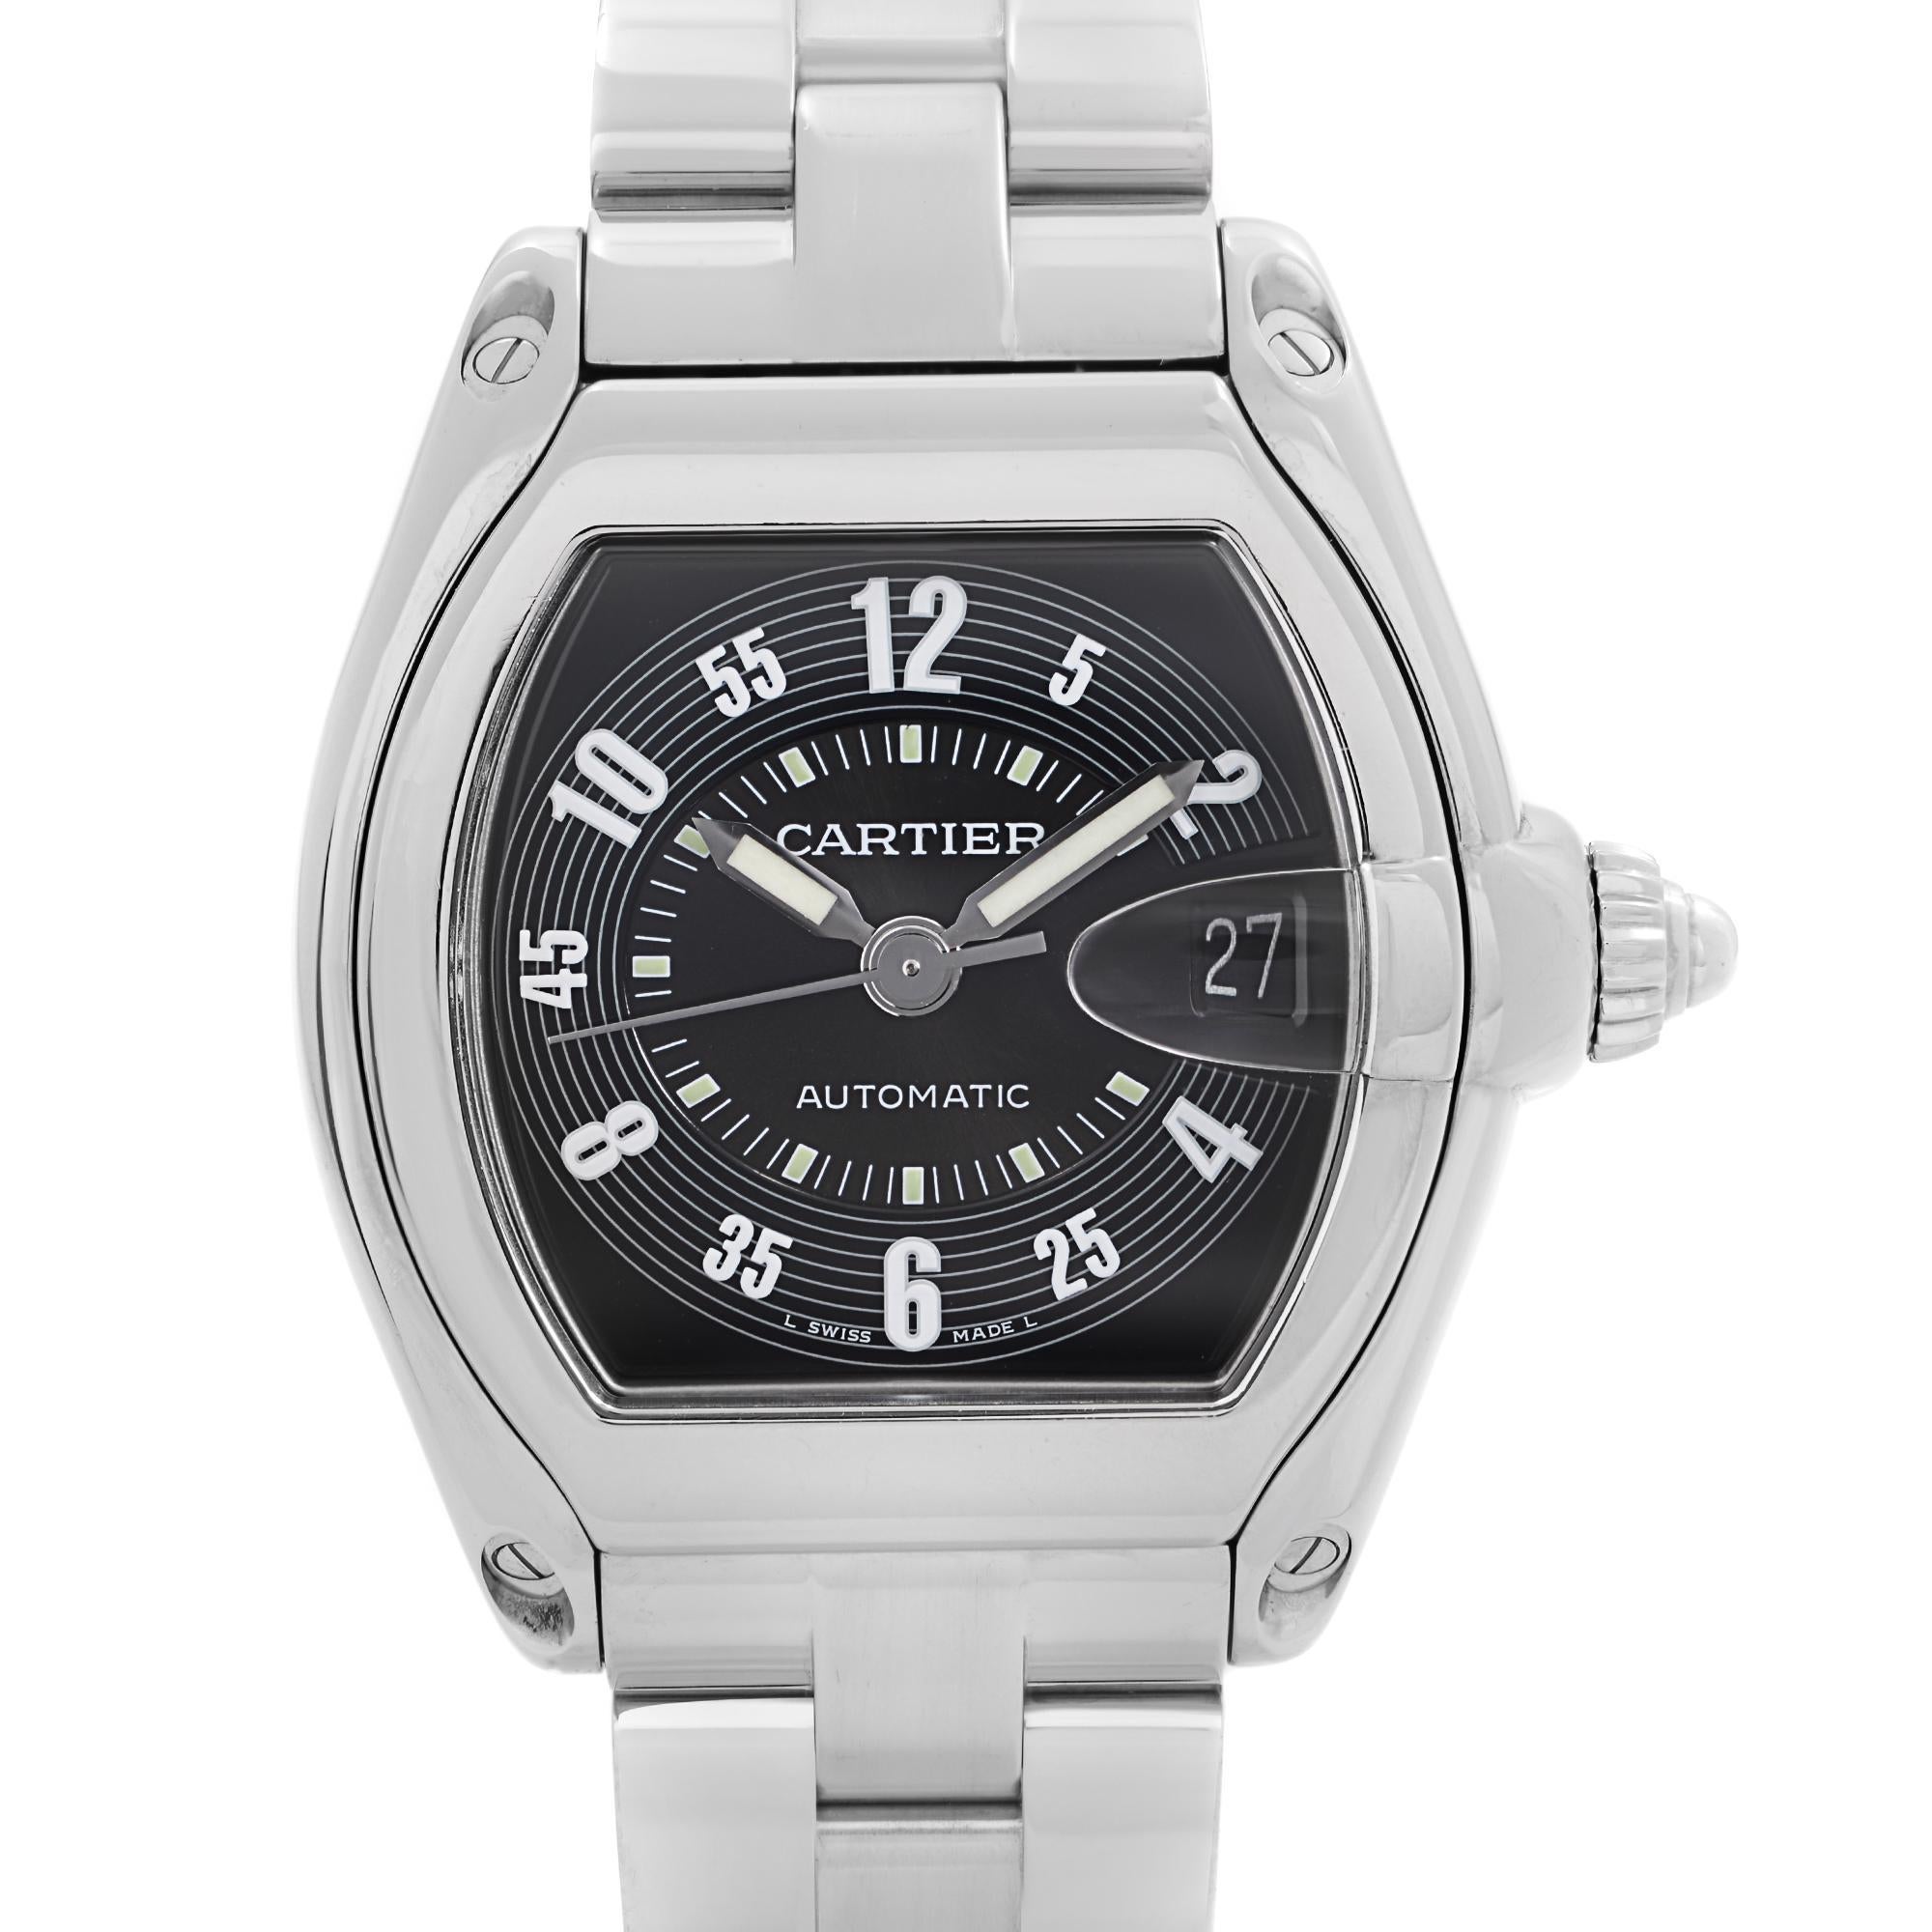 Pre-owned Cartier Roadster 38mm X 43mm Stainless Steel Black Dial Mens Automatic Watch W62004V3. This Timepiece is powered by Automatic movement with and features: Stainless Steel Case and bracelet with Deployment Clasp. Fixed Stainless Steel bezel.